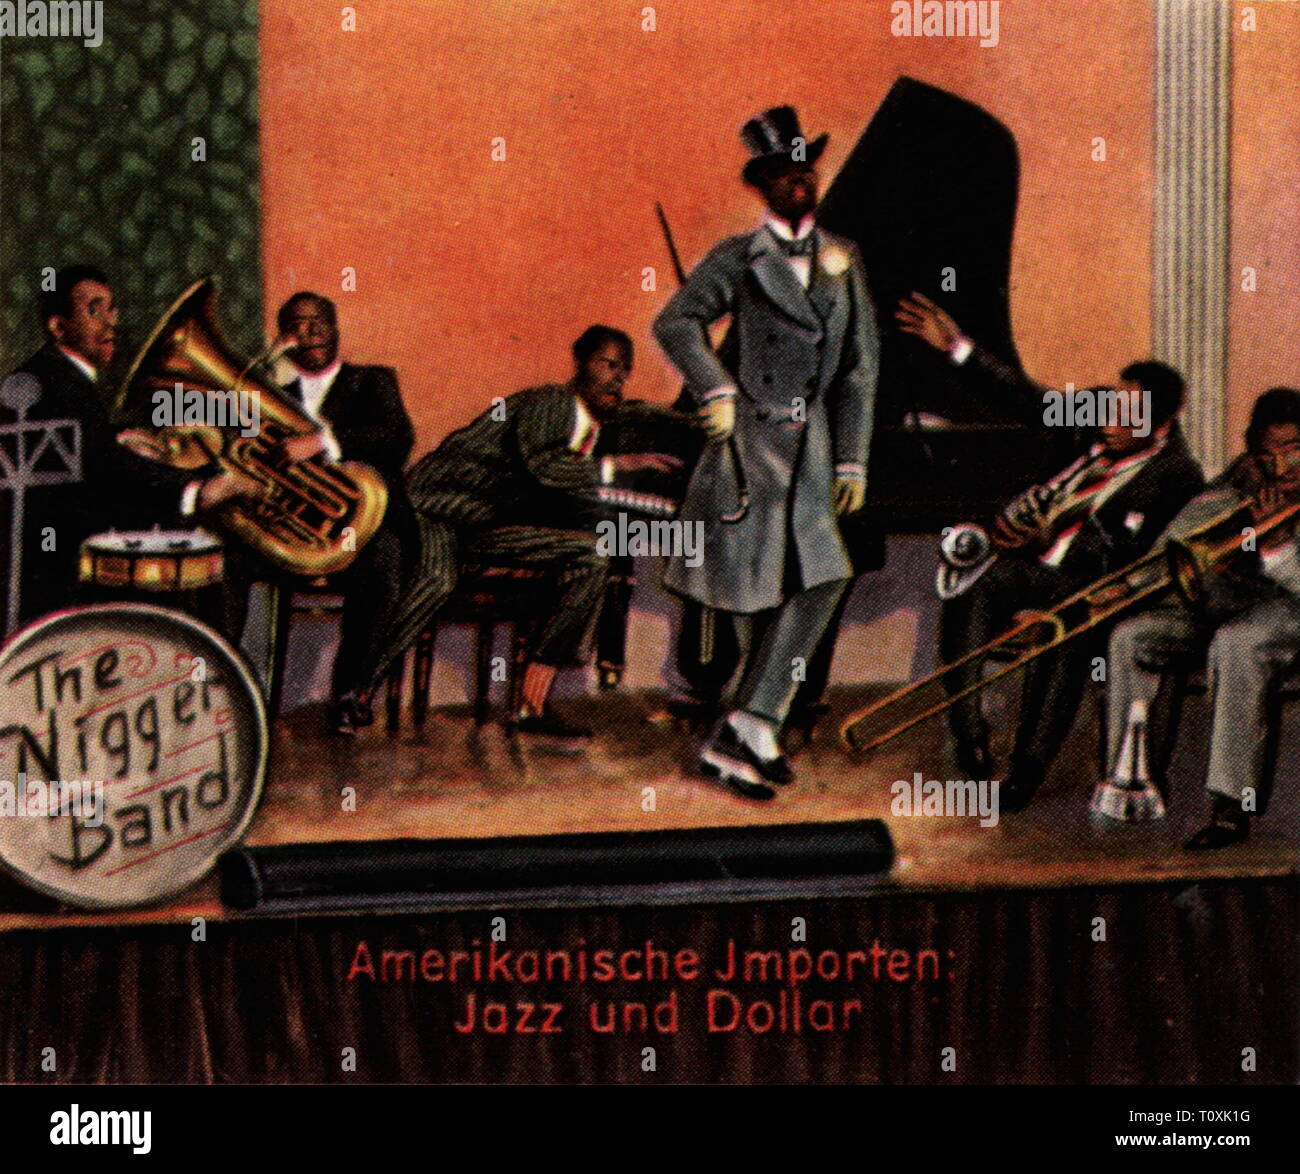 music, coloured jazz band, 'American importations: Dollar and Jazz', early 1925, coloured photograph, cigarette card, series 'Die Nachkriegszeit', 1935, musician, musicians, vocalist, vocalists, African-American, African-Americans, people, Germany, German Reich, Weimar Republic, 1920s, 20th century, band, bands, importations, imports, import, dollar, dollars, coloured, colored, post war period, post-war period, post-war years, post-war era, historic, historical, Additional-Rights-Clearance-Info-Not-Available Stock Photo